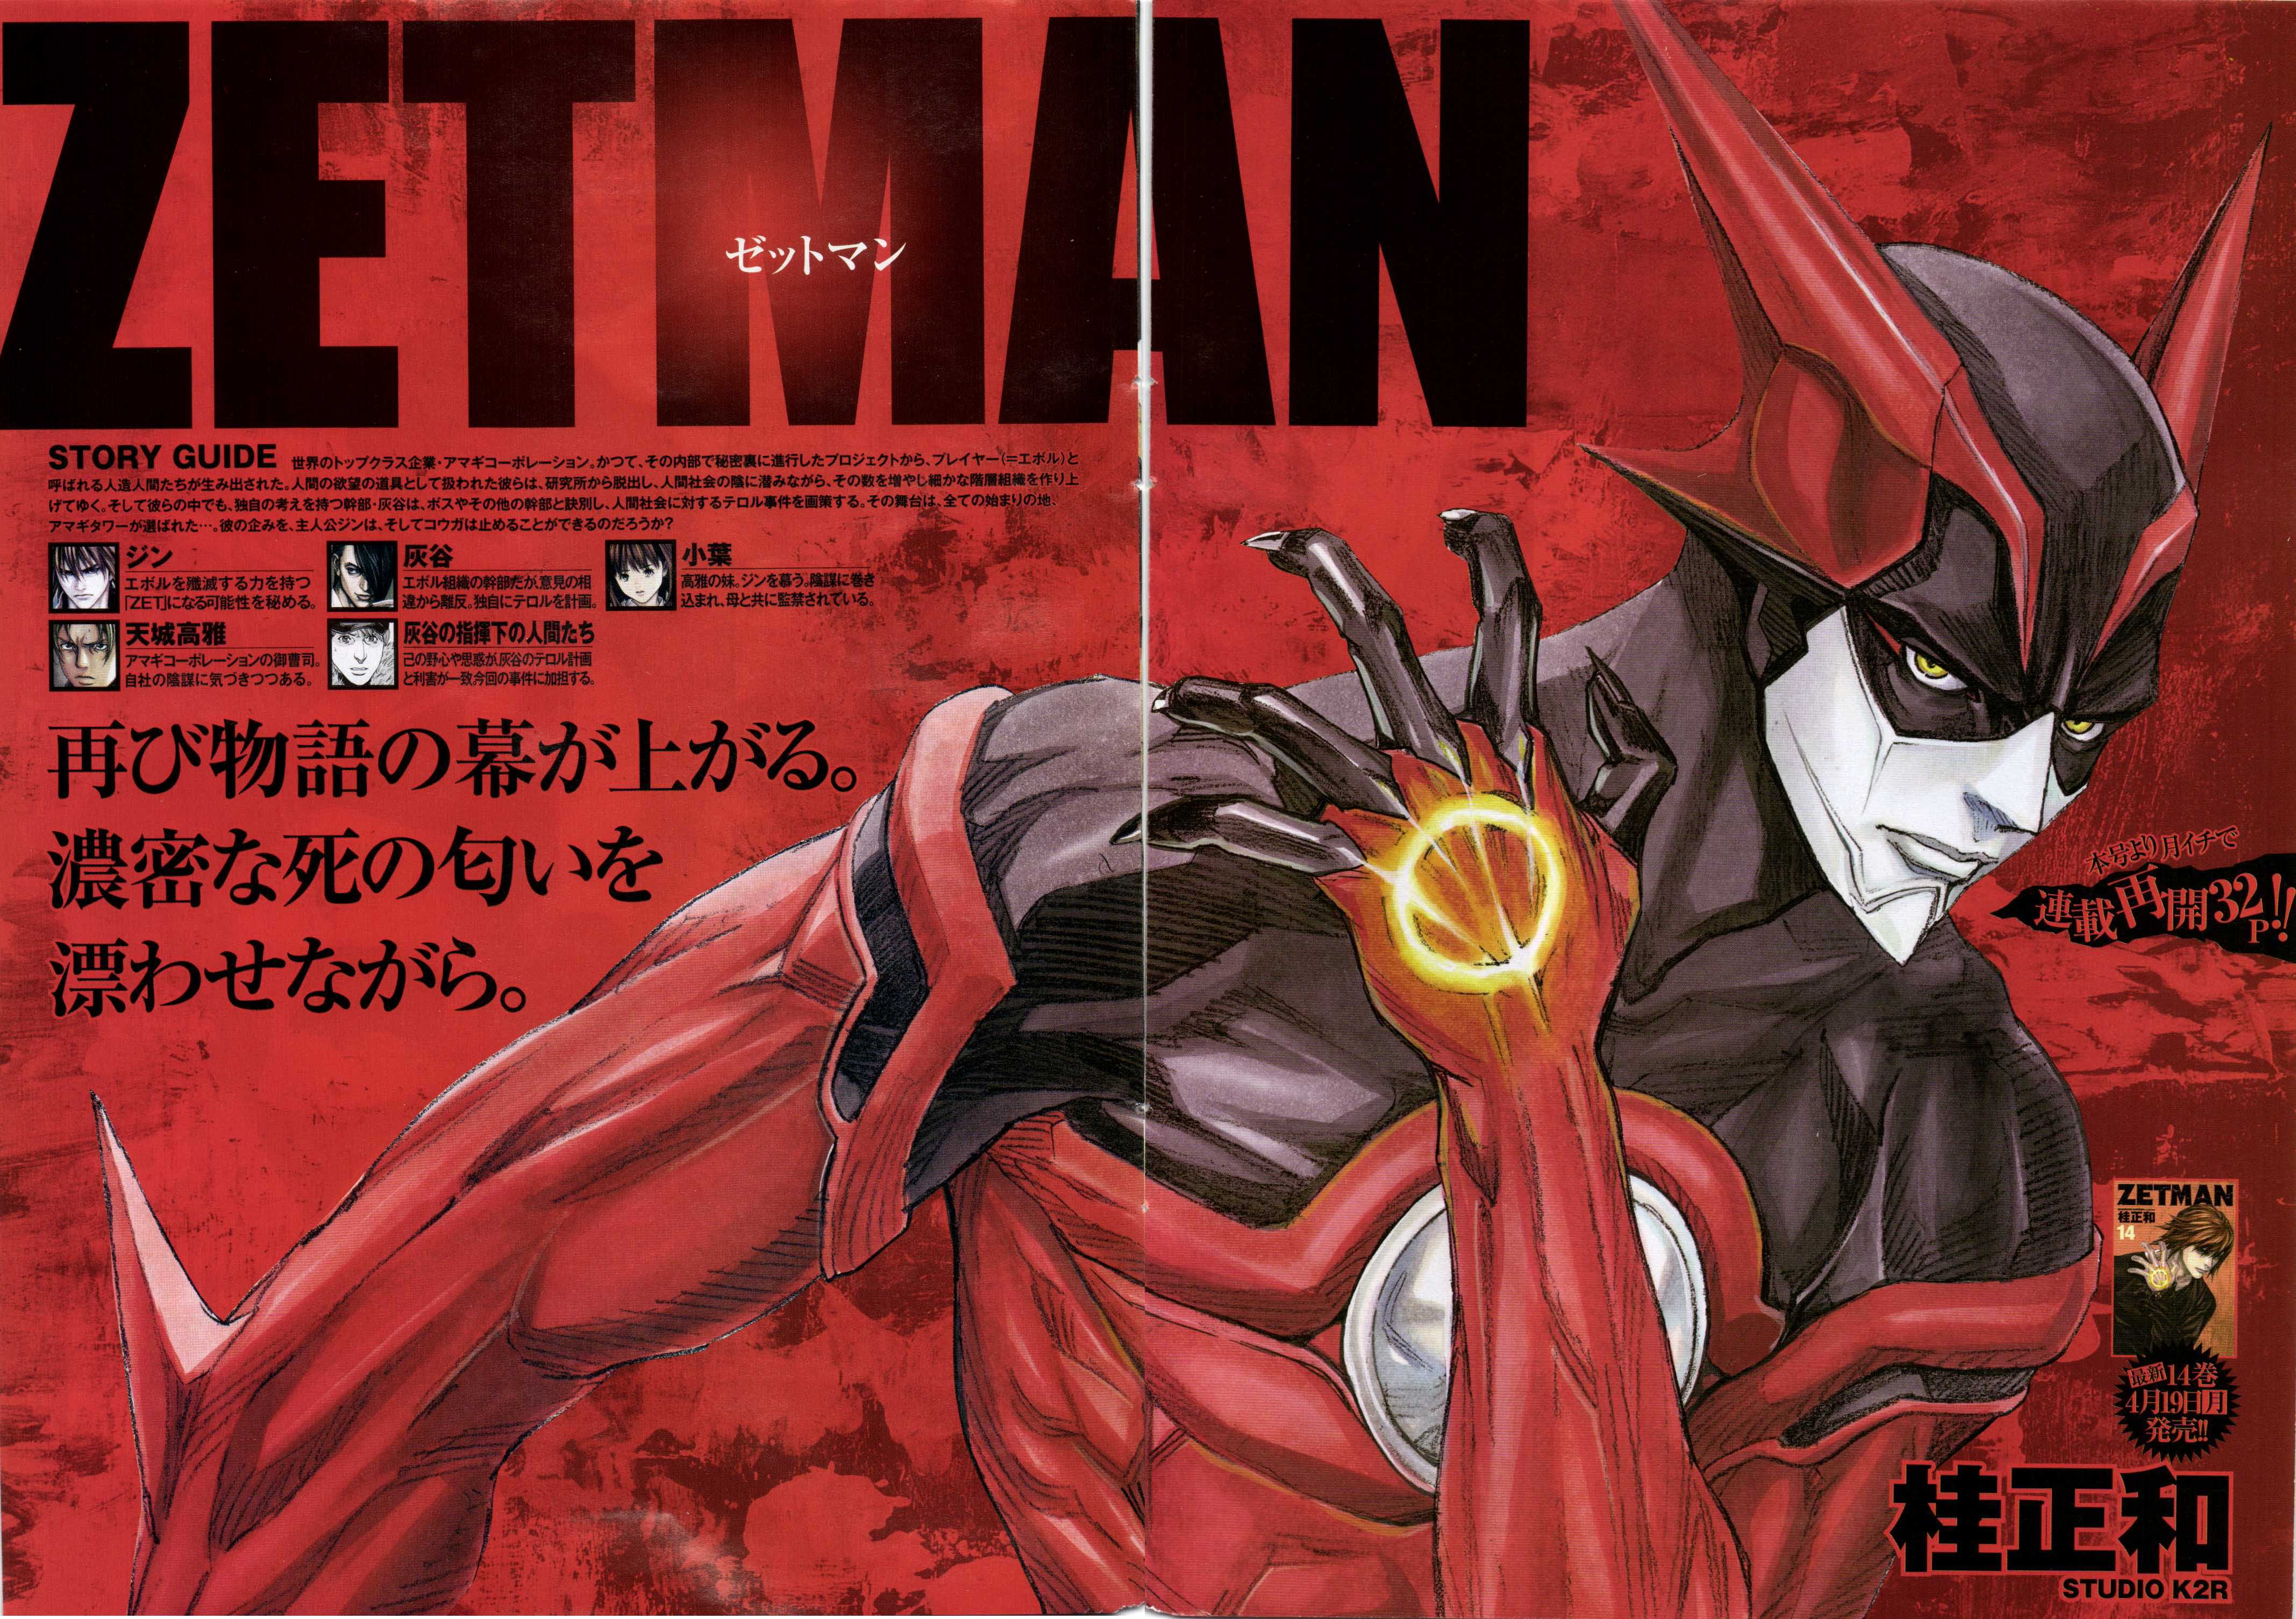 Zetman and Scan Gallery